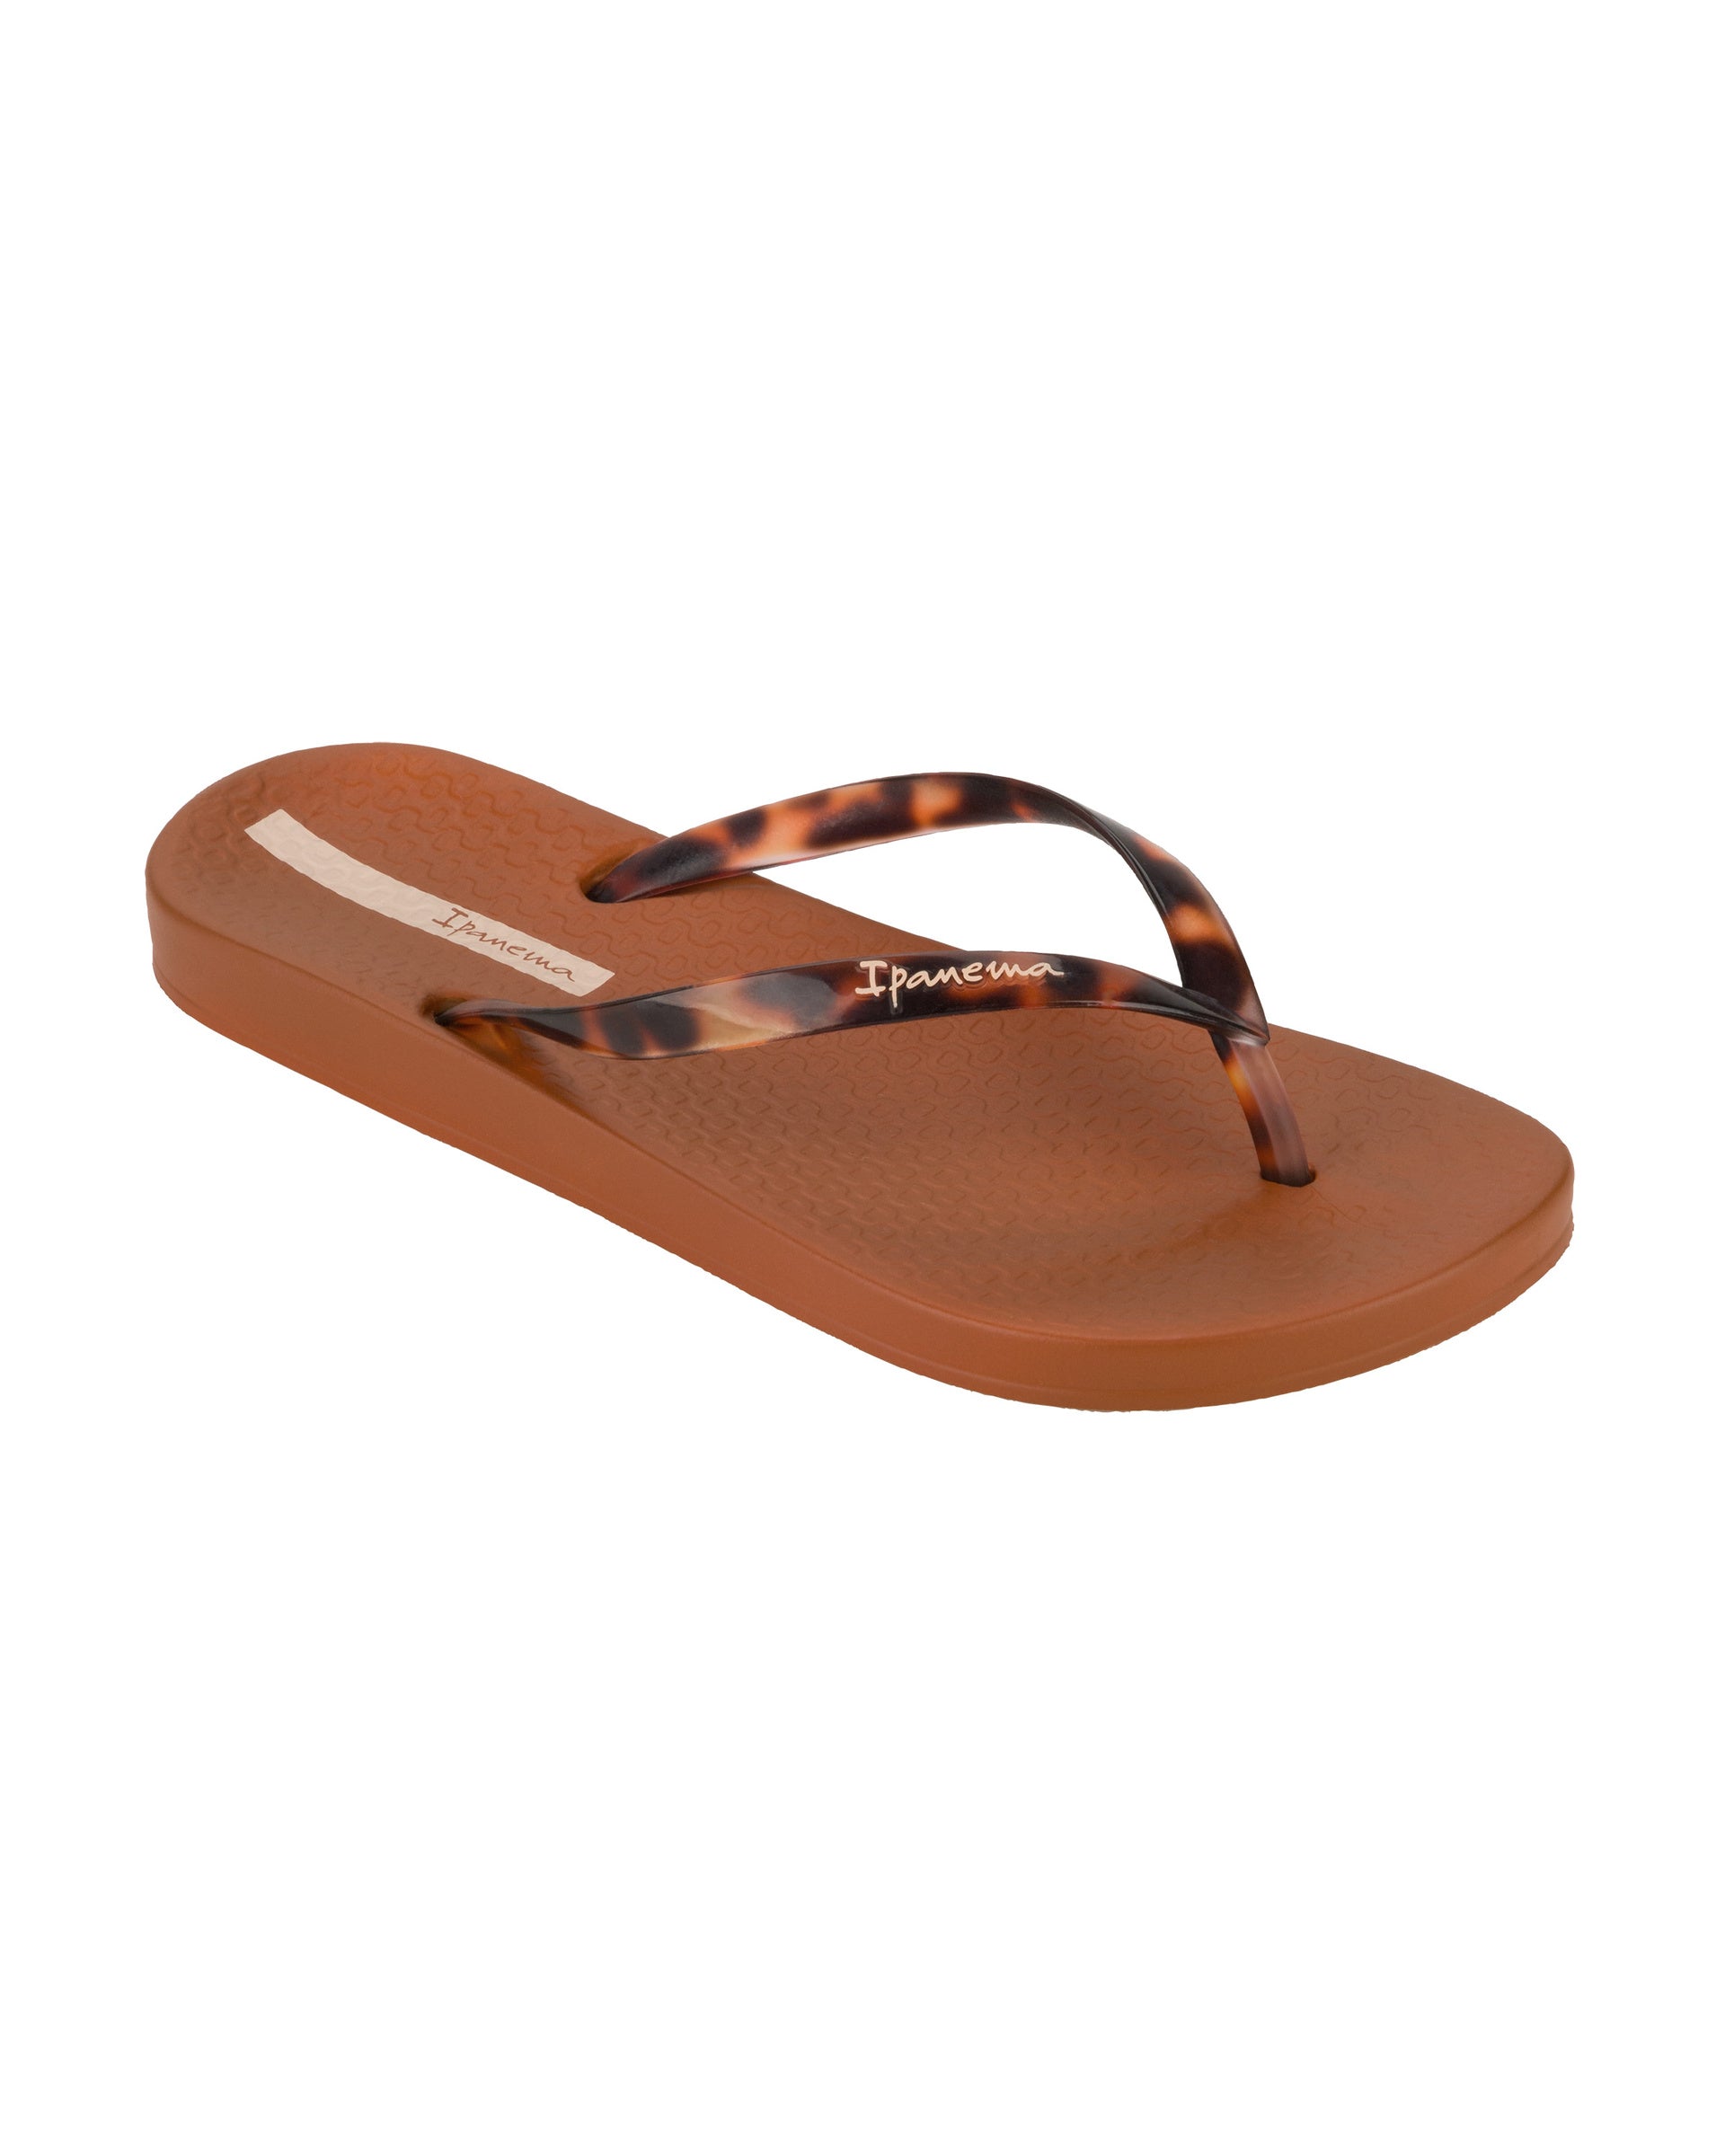 Angled view of a brown Ipanema Ana Connect women's flip flop with brown tortoiseshell  color strap.